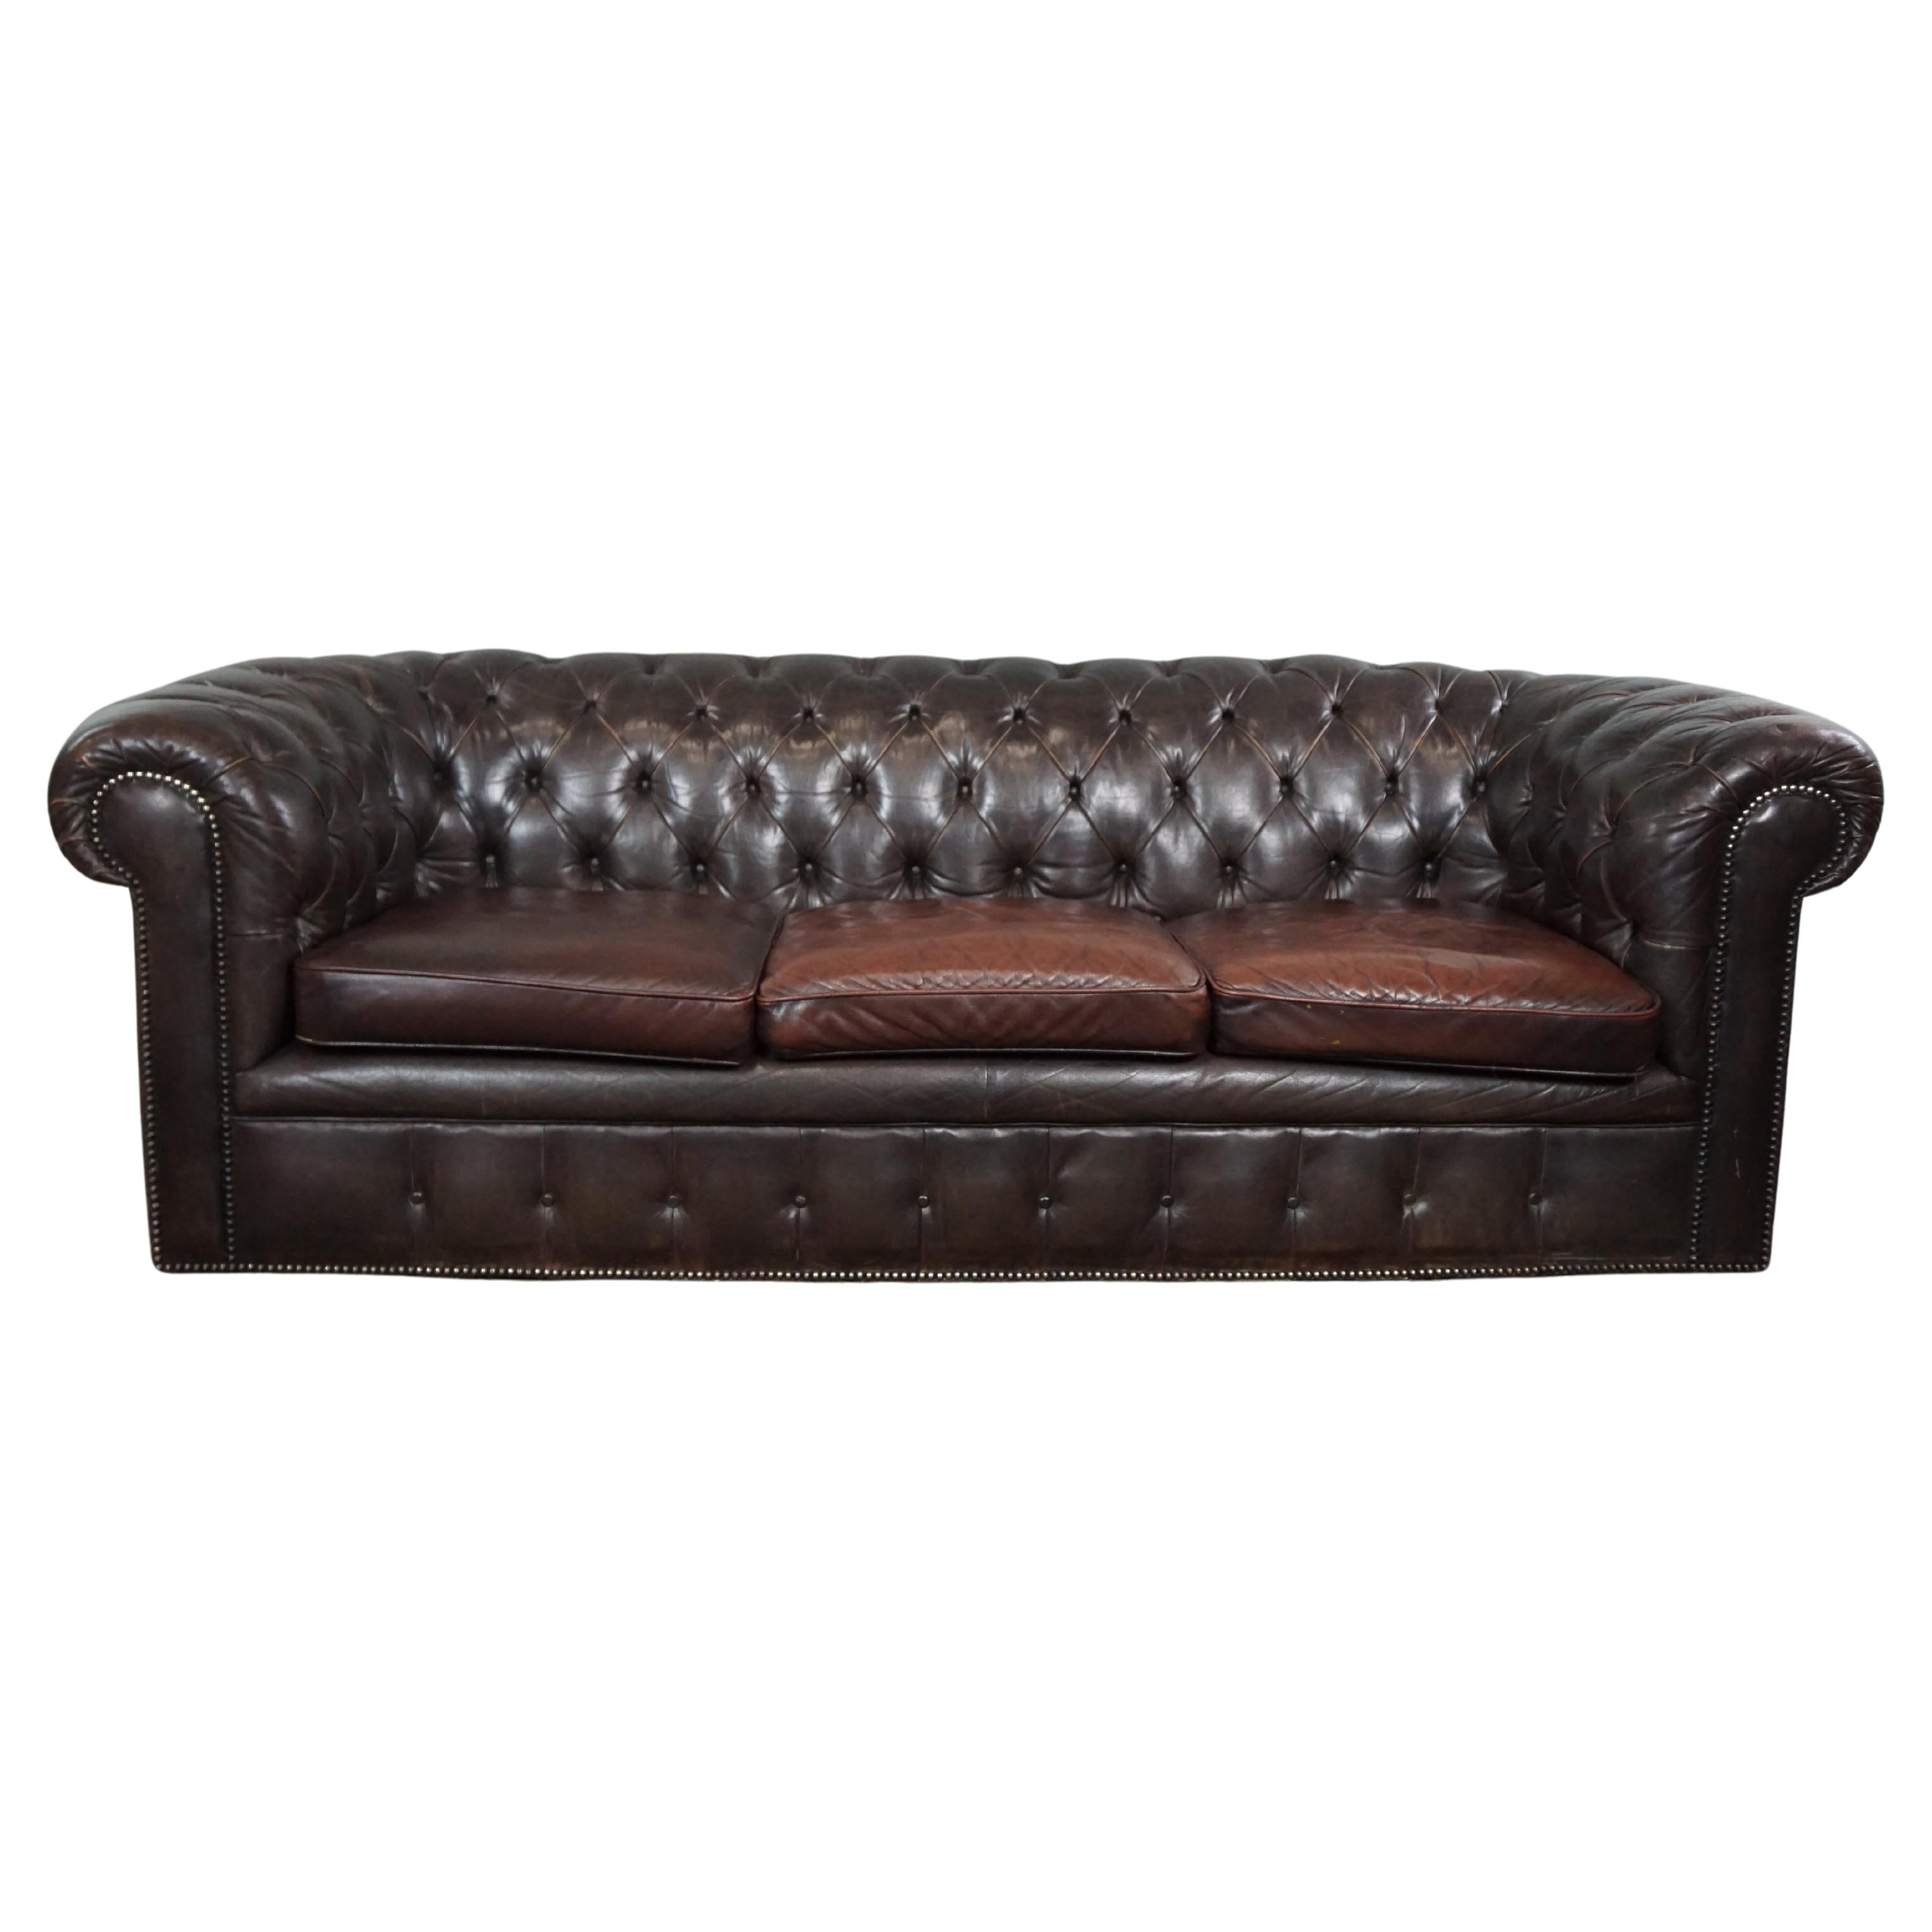 Dazzling old Chesterfield sofa full of allure, 3 seater For Sale